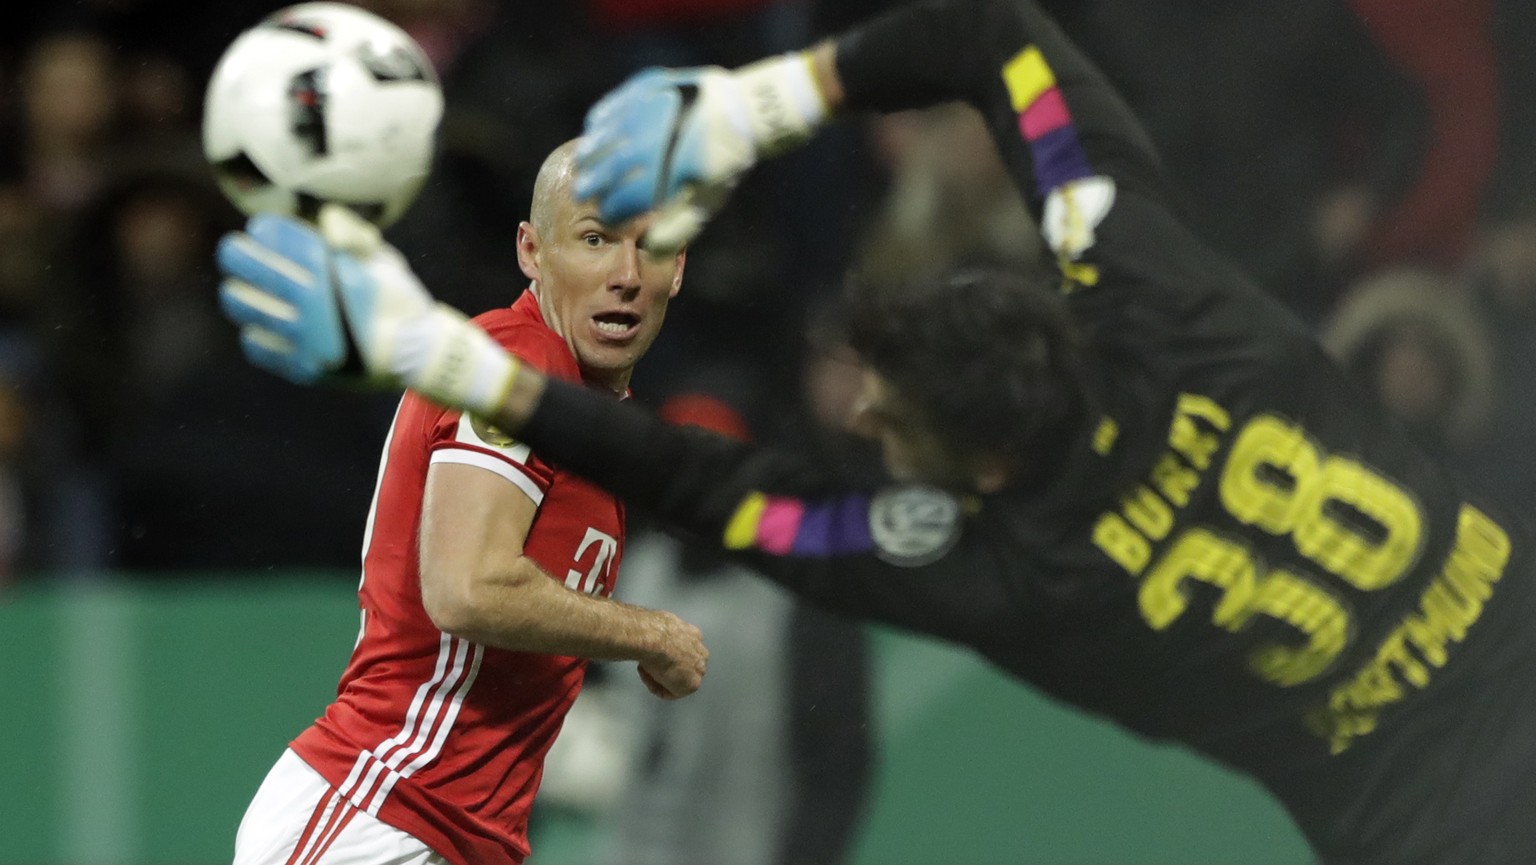 Bayern&#039;s Arjen Robben tries to score in front of Dortmund goalkeeper Roman Buerki during the German Soccer Cup semifinal match between FC Bayern Munich and Borussia Dortmund at the Allianz Arena  ...